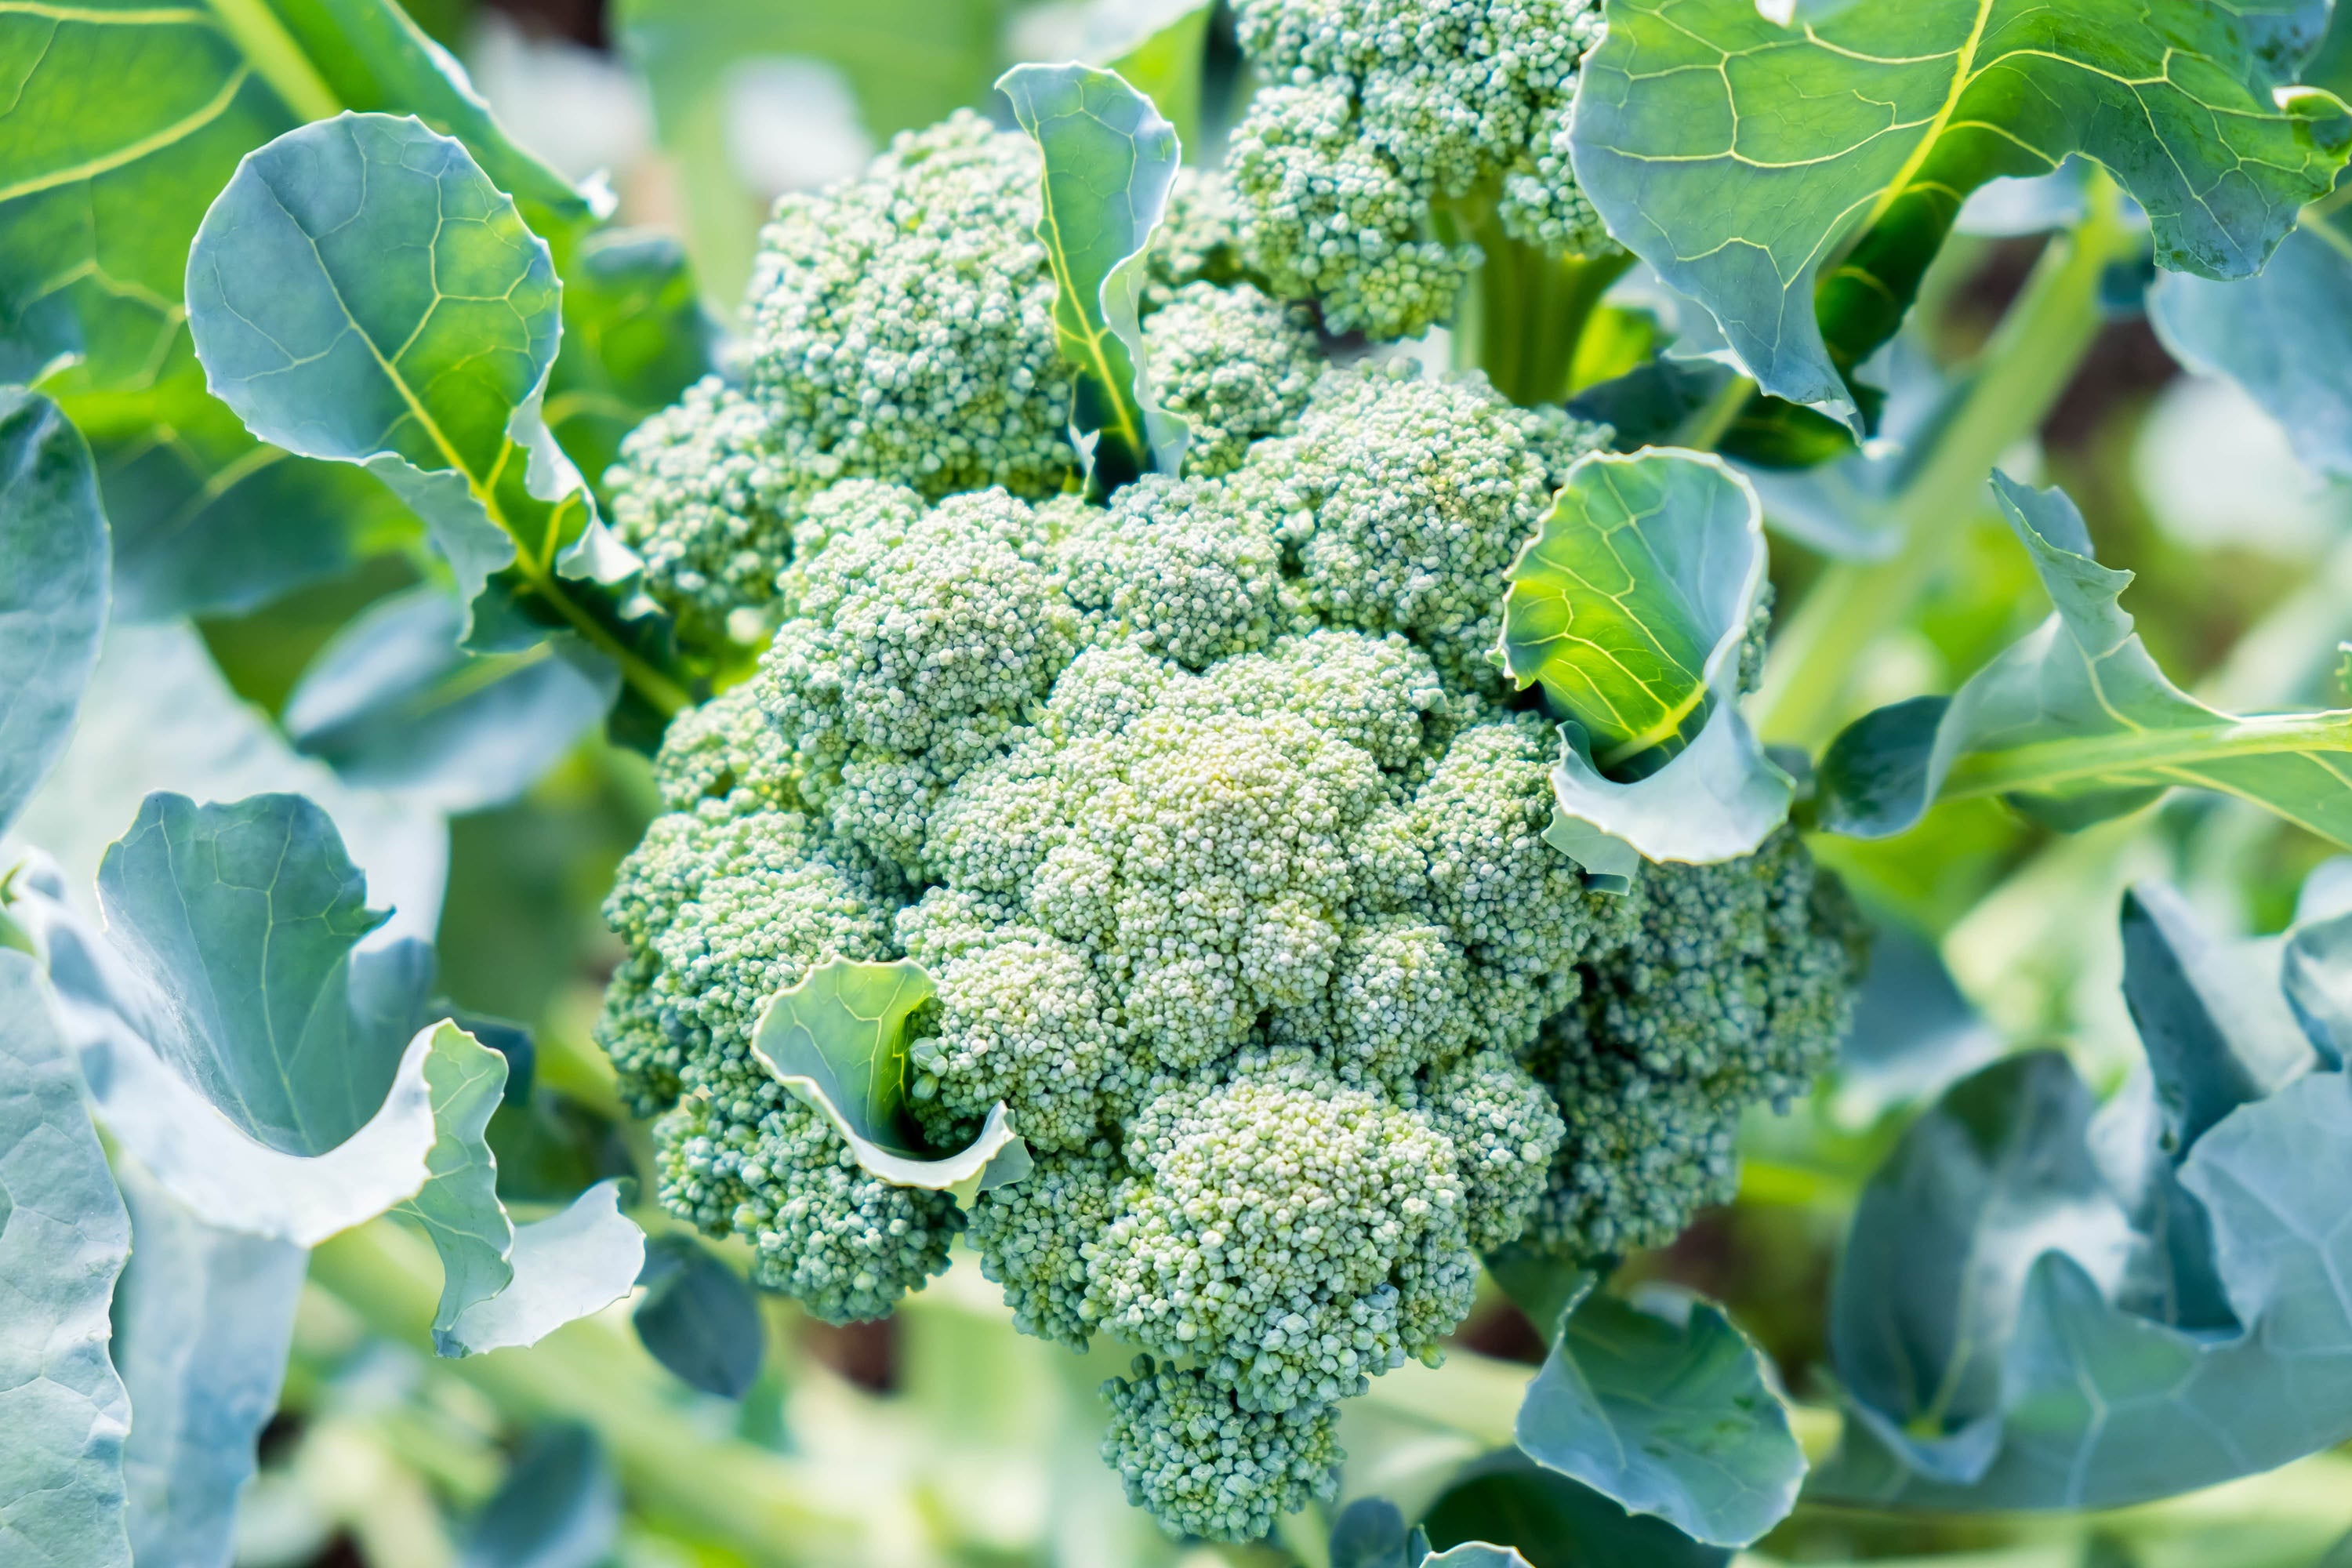 Image of Broccoli vegetable to grow in late summer